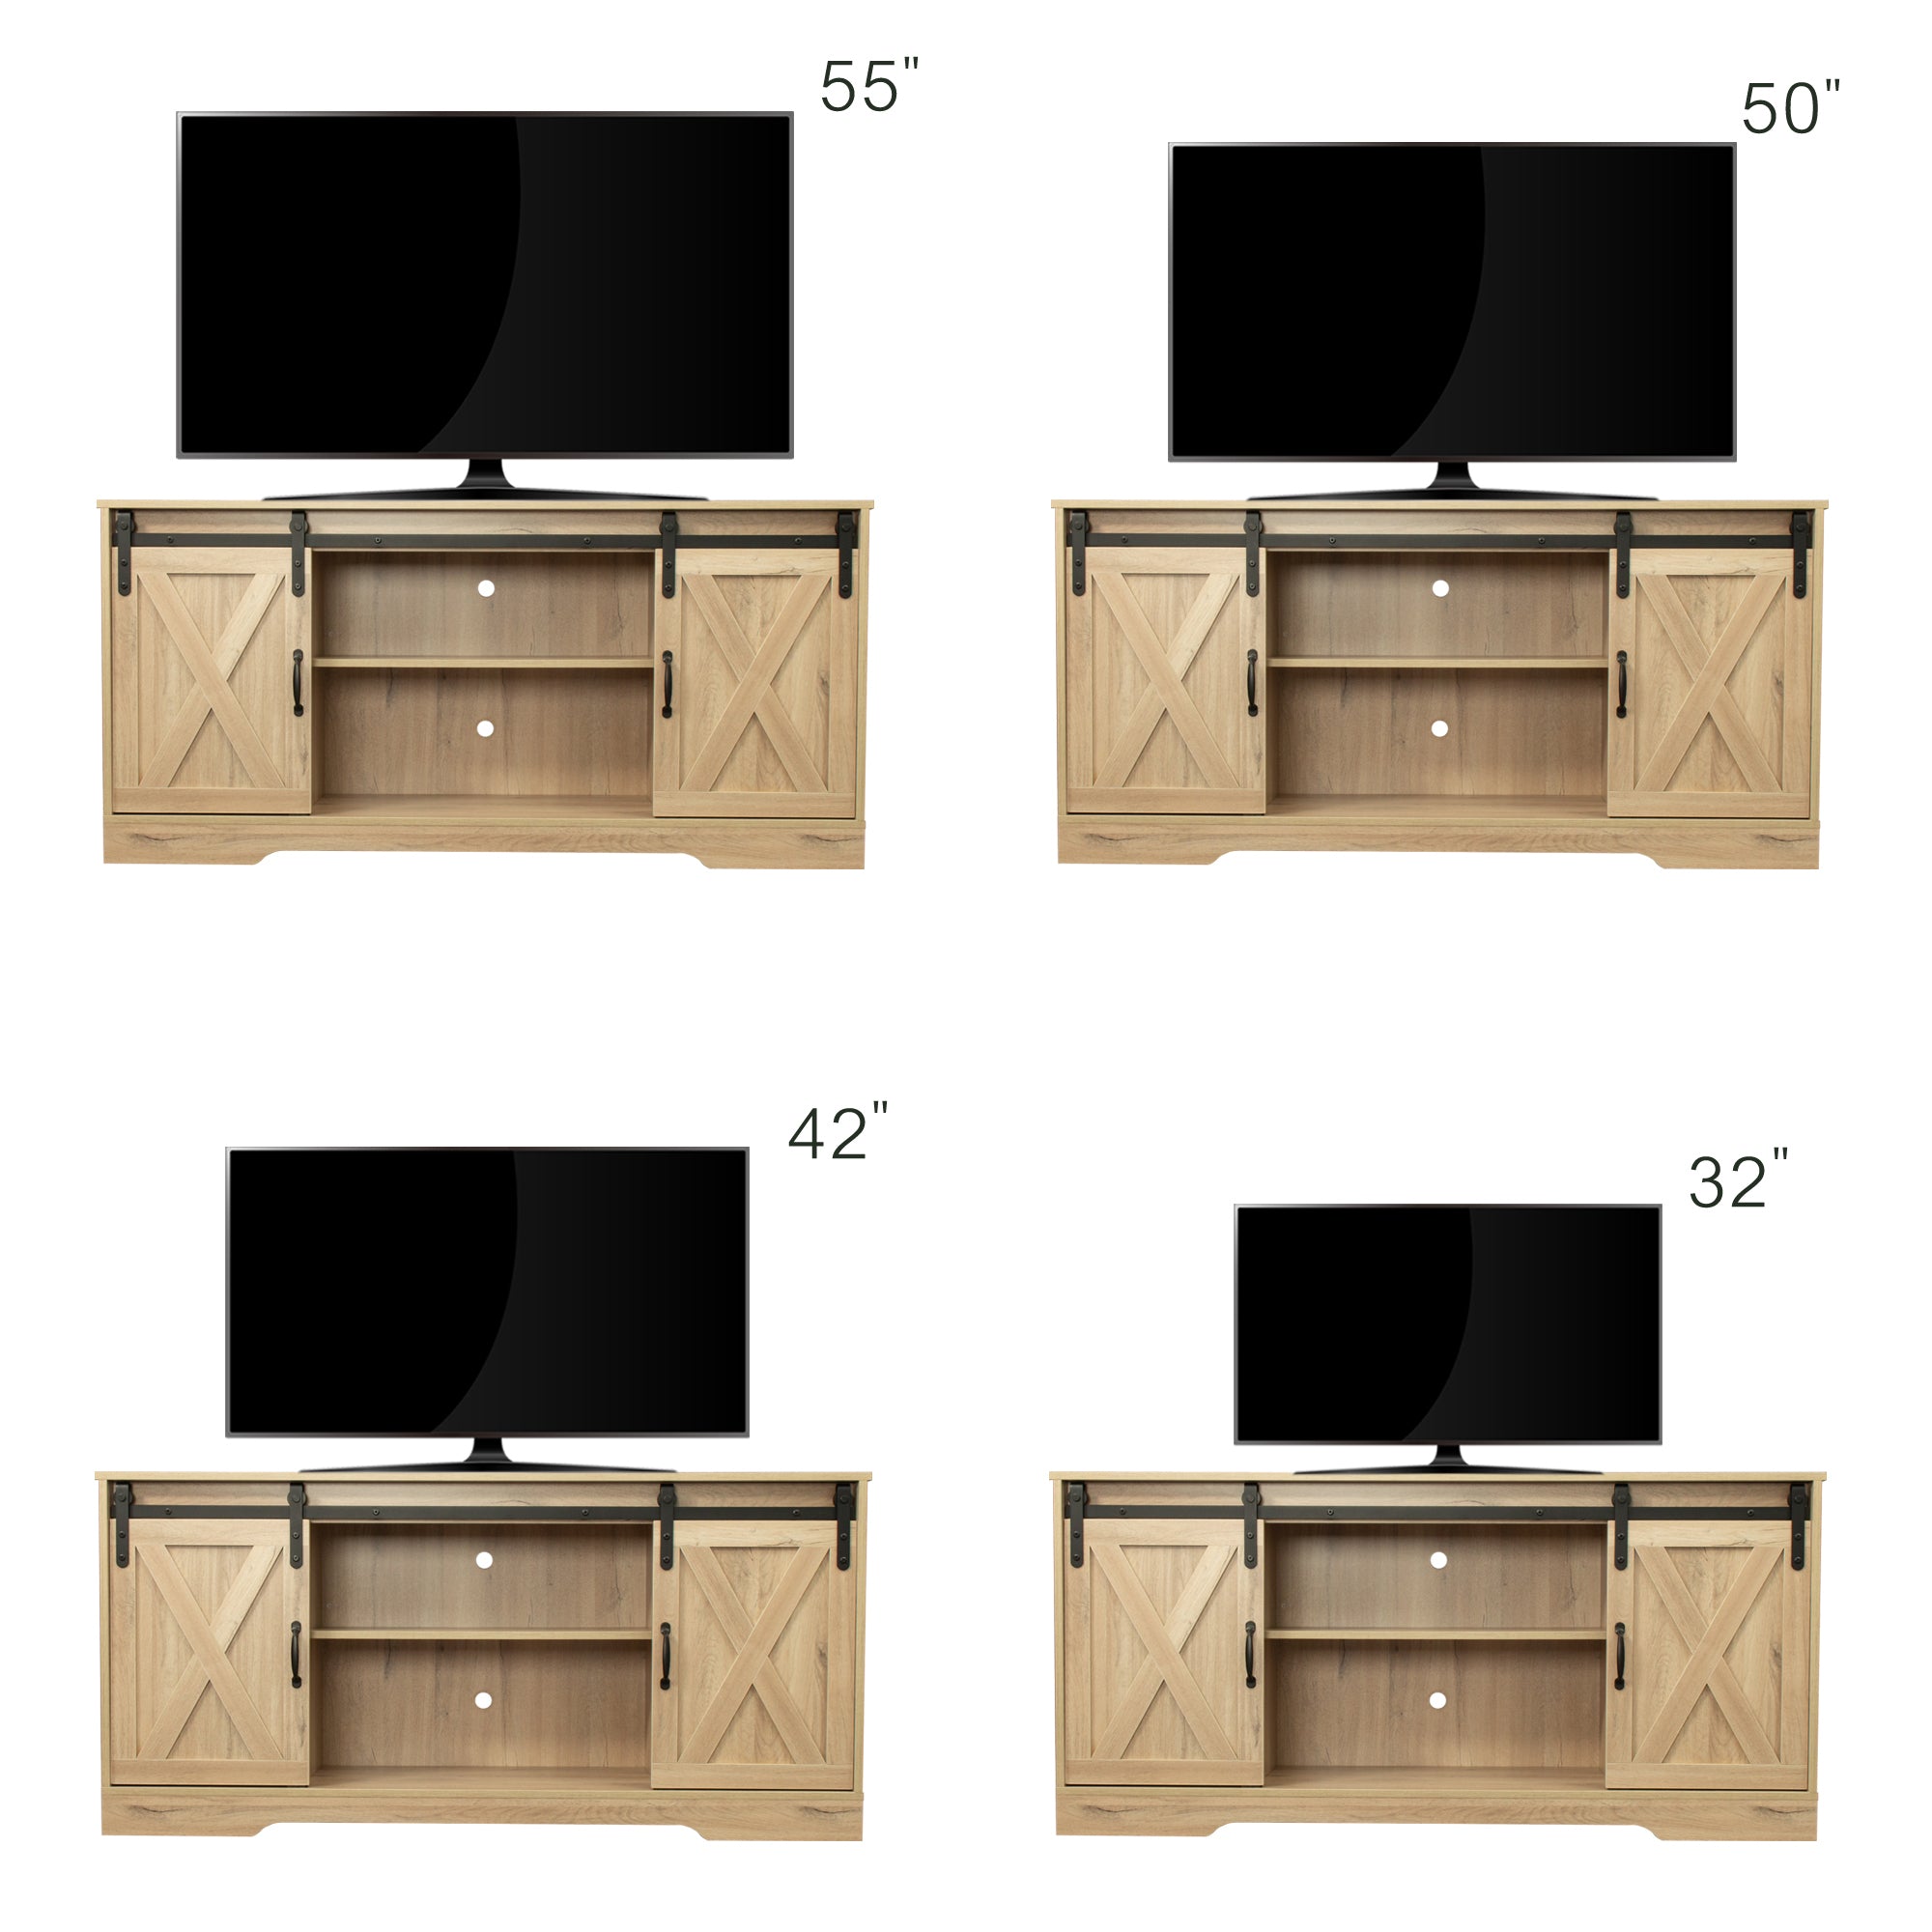 Modern & Farmhouse Wood TV Stand with Sliding Barn Doors for TVs Up to 65", Oak